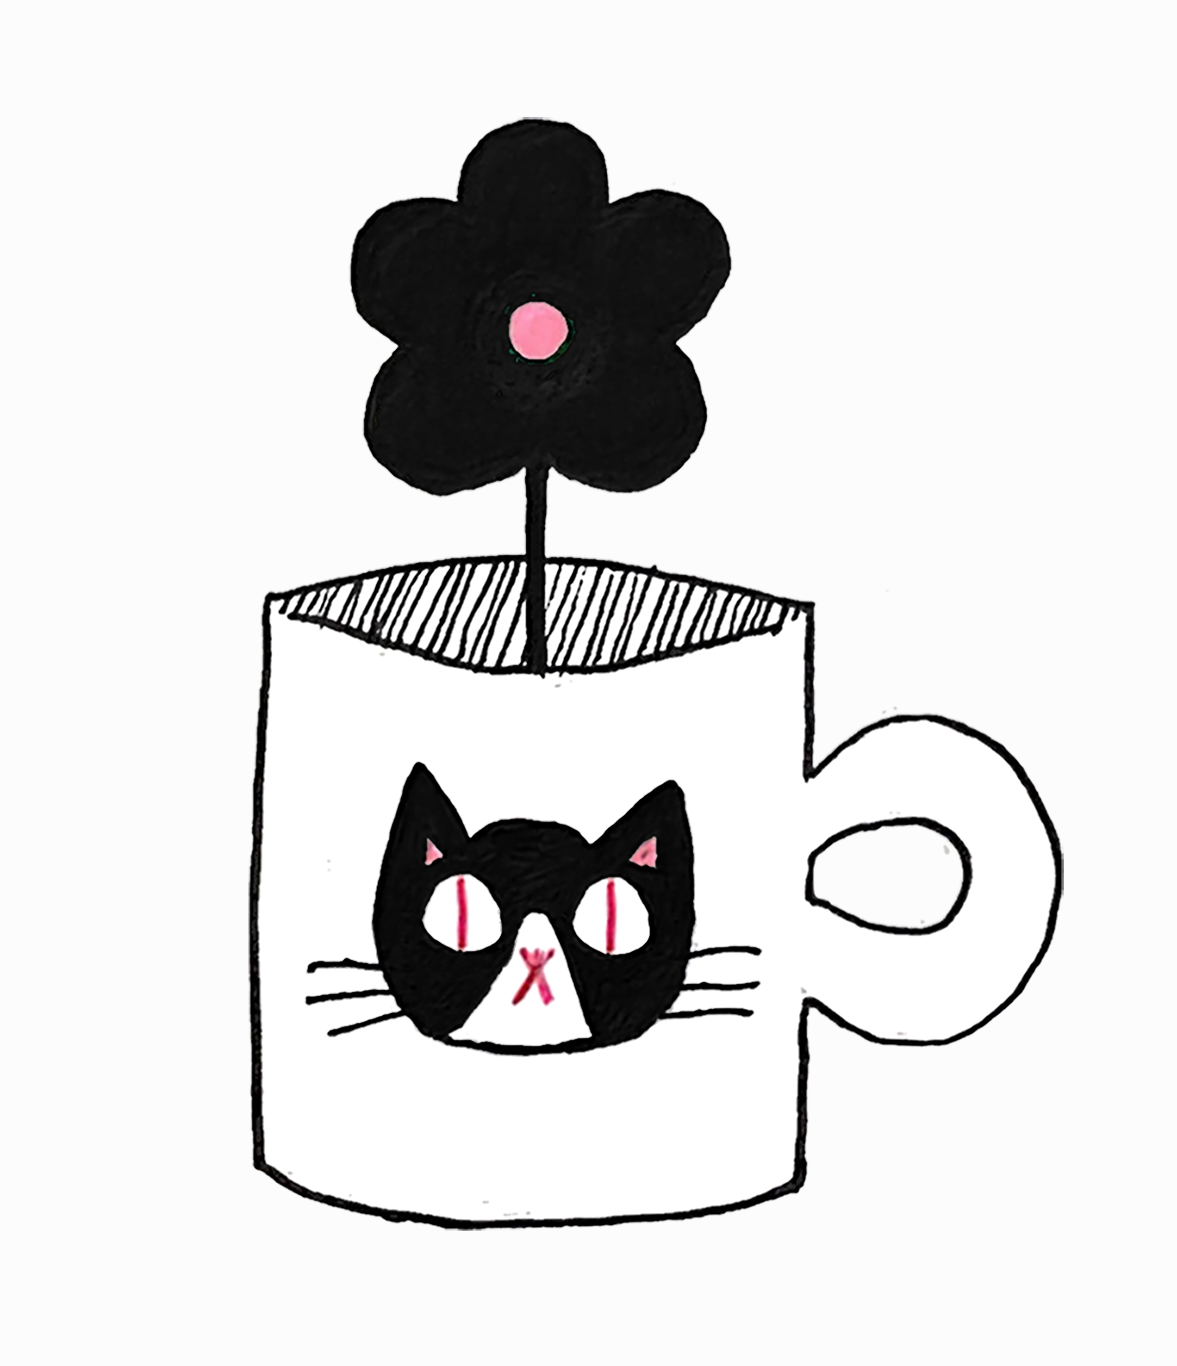 Drawing of a stylized mug containing a simple black flower with a pink center. Centered on the front of the mug is a stylized tuxedo cat face. The entire drawing is centered on a slightly off-white background.